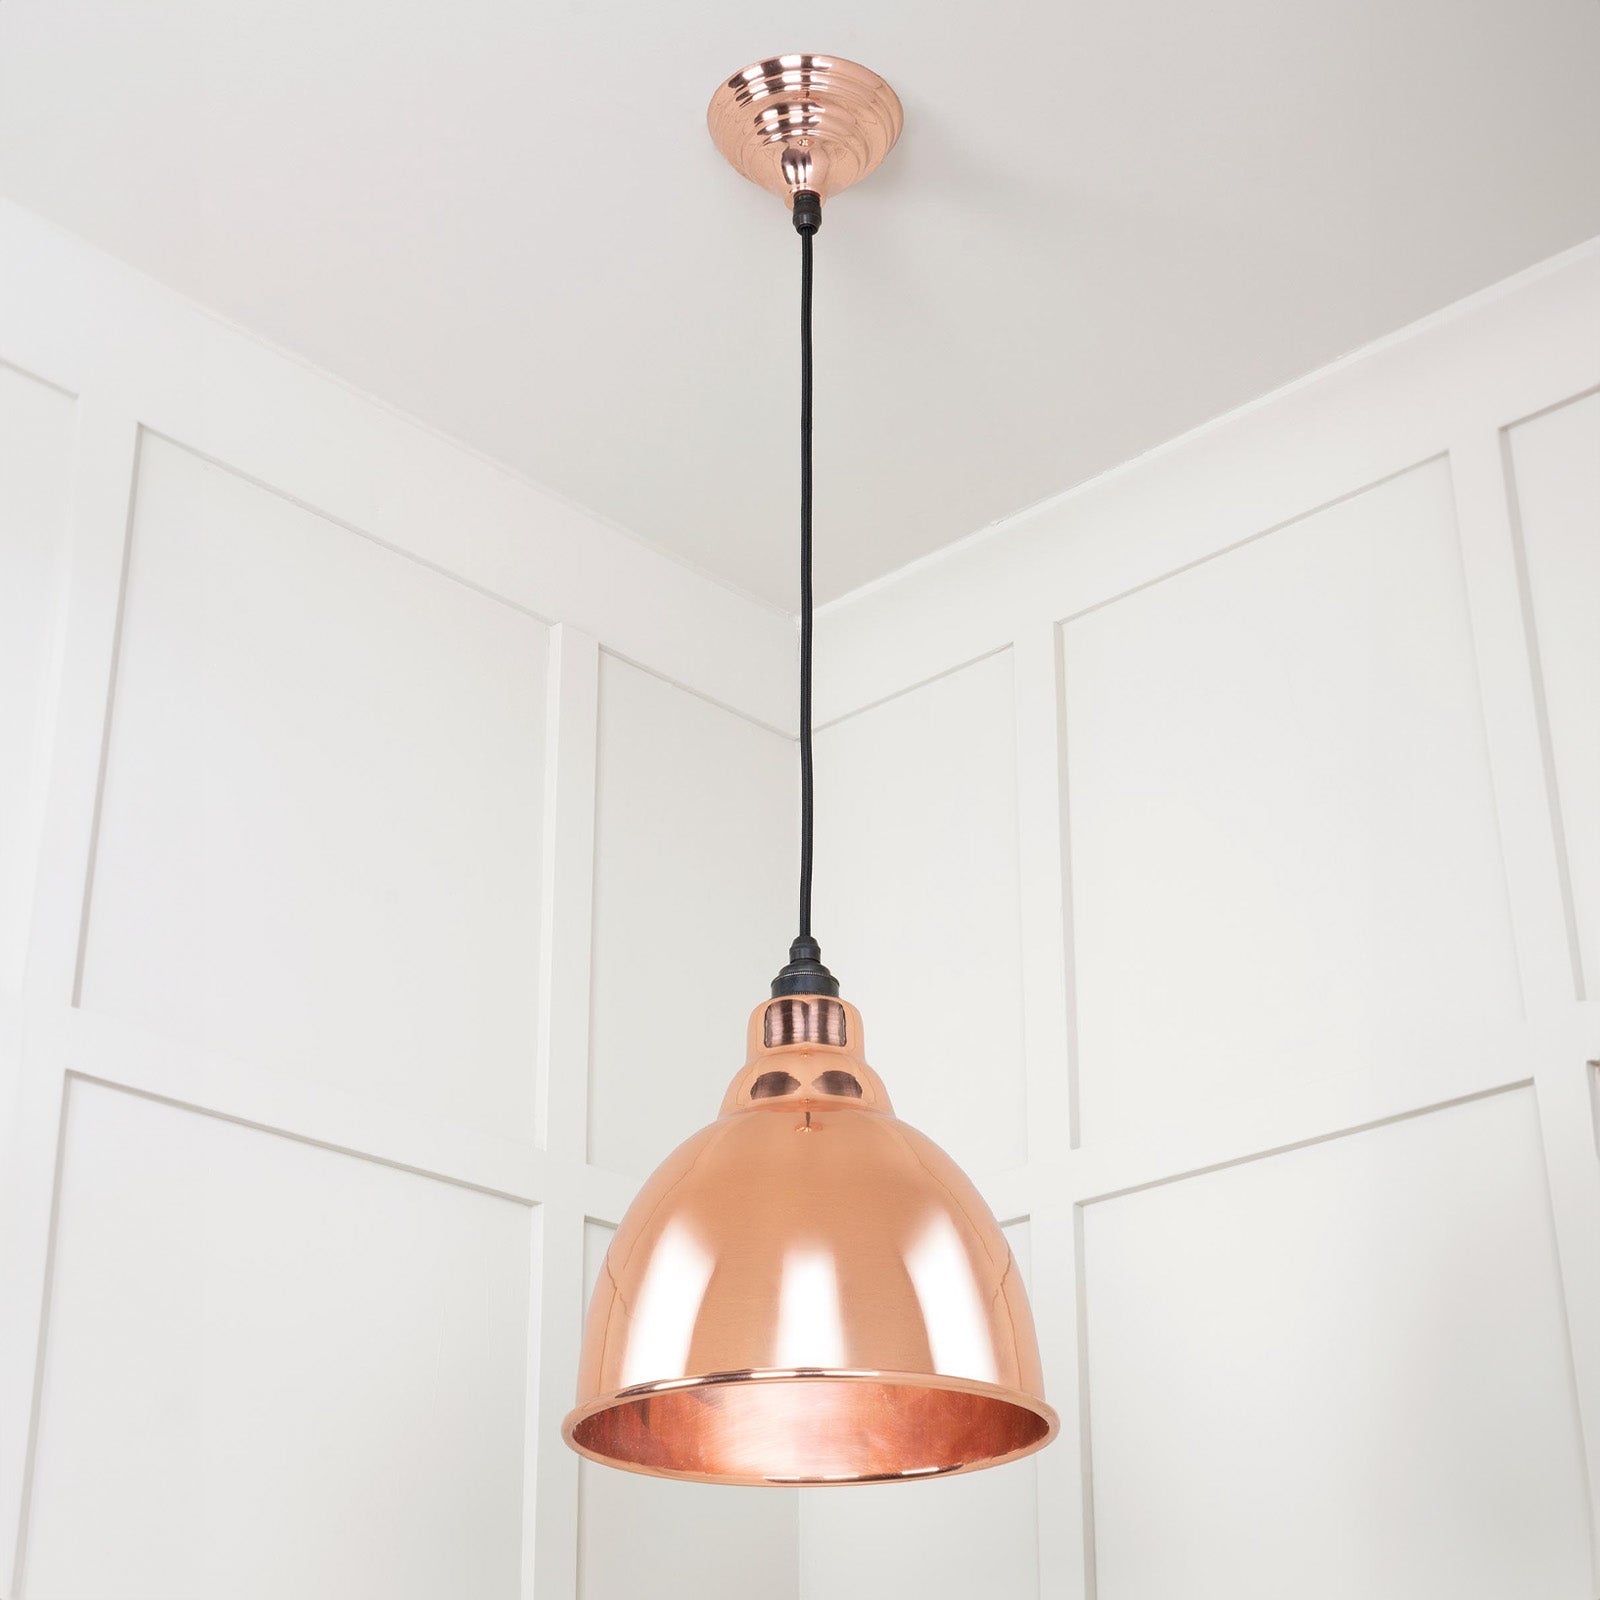 SHOW Full Image of Hanging Brindley Ceiling Light in Copper